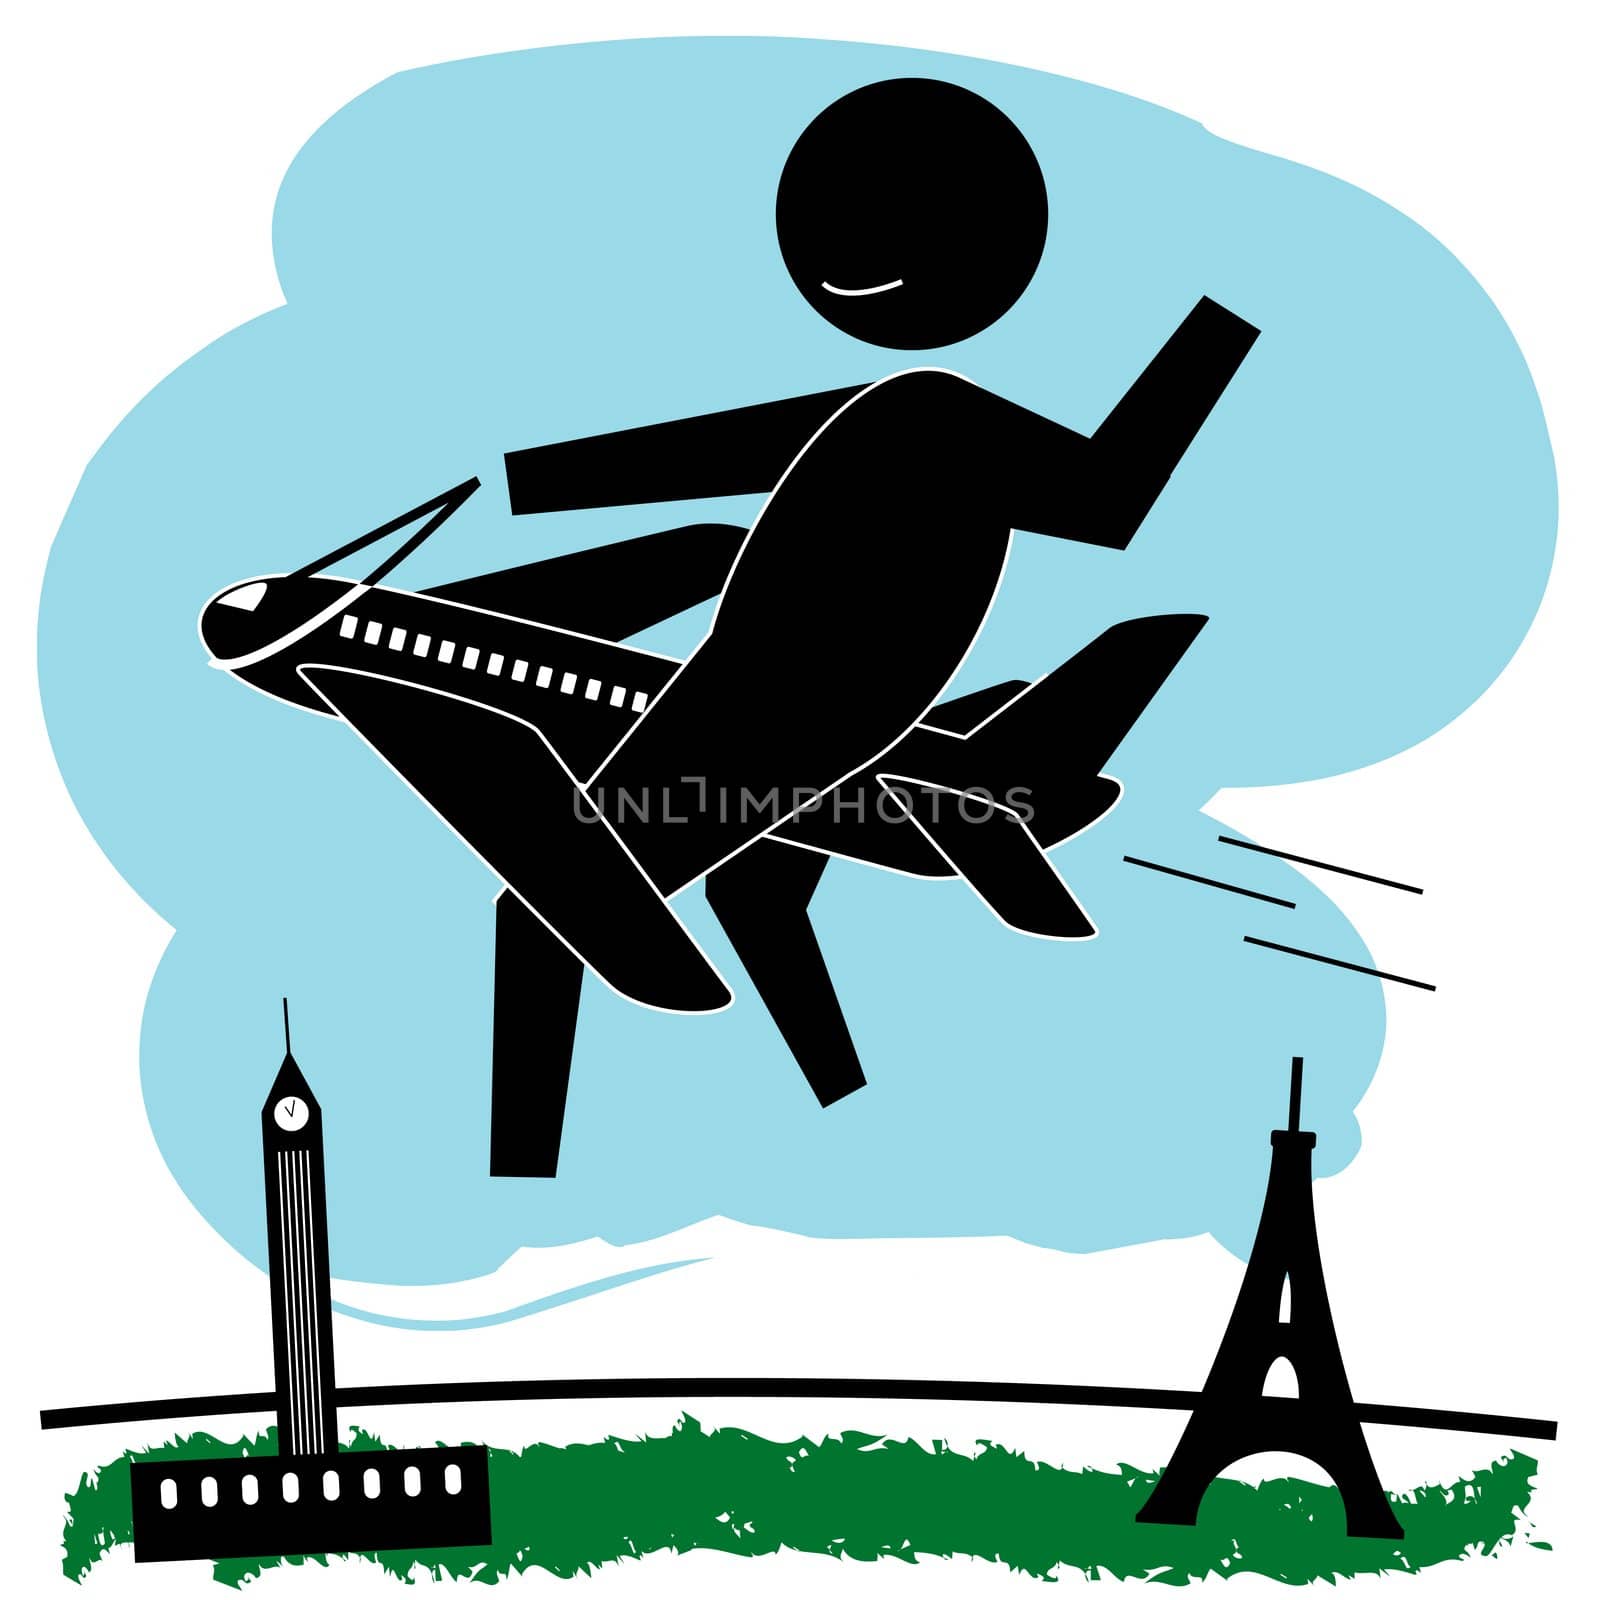 Black graphic figure riding on an airplane over the Eiffel Tower and Big Ben.